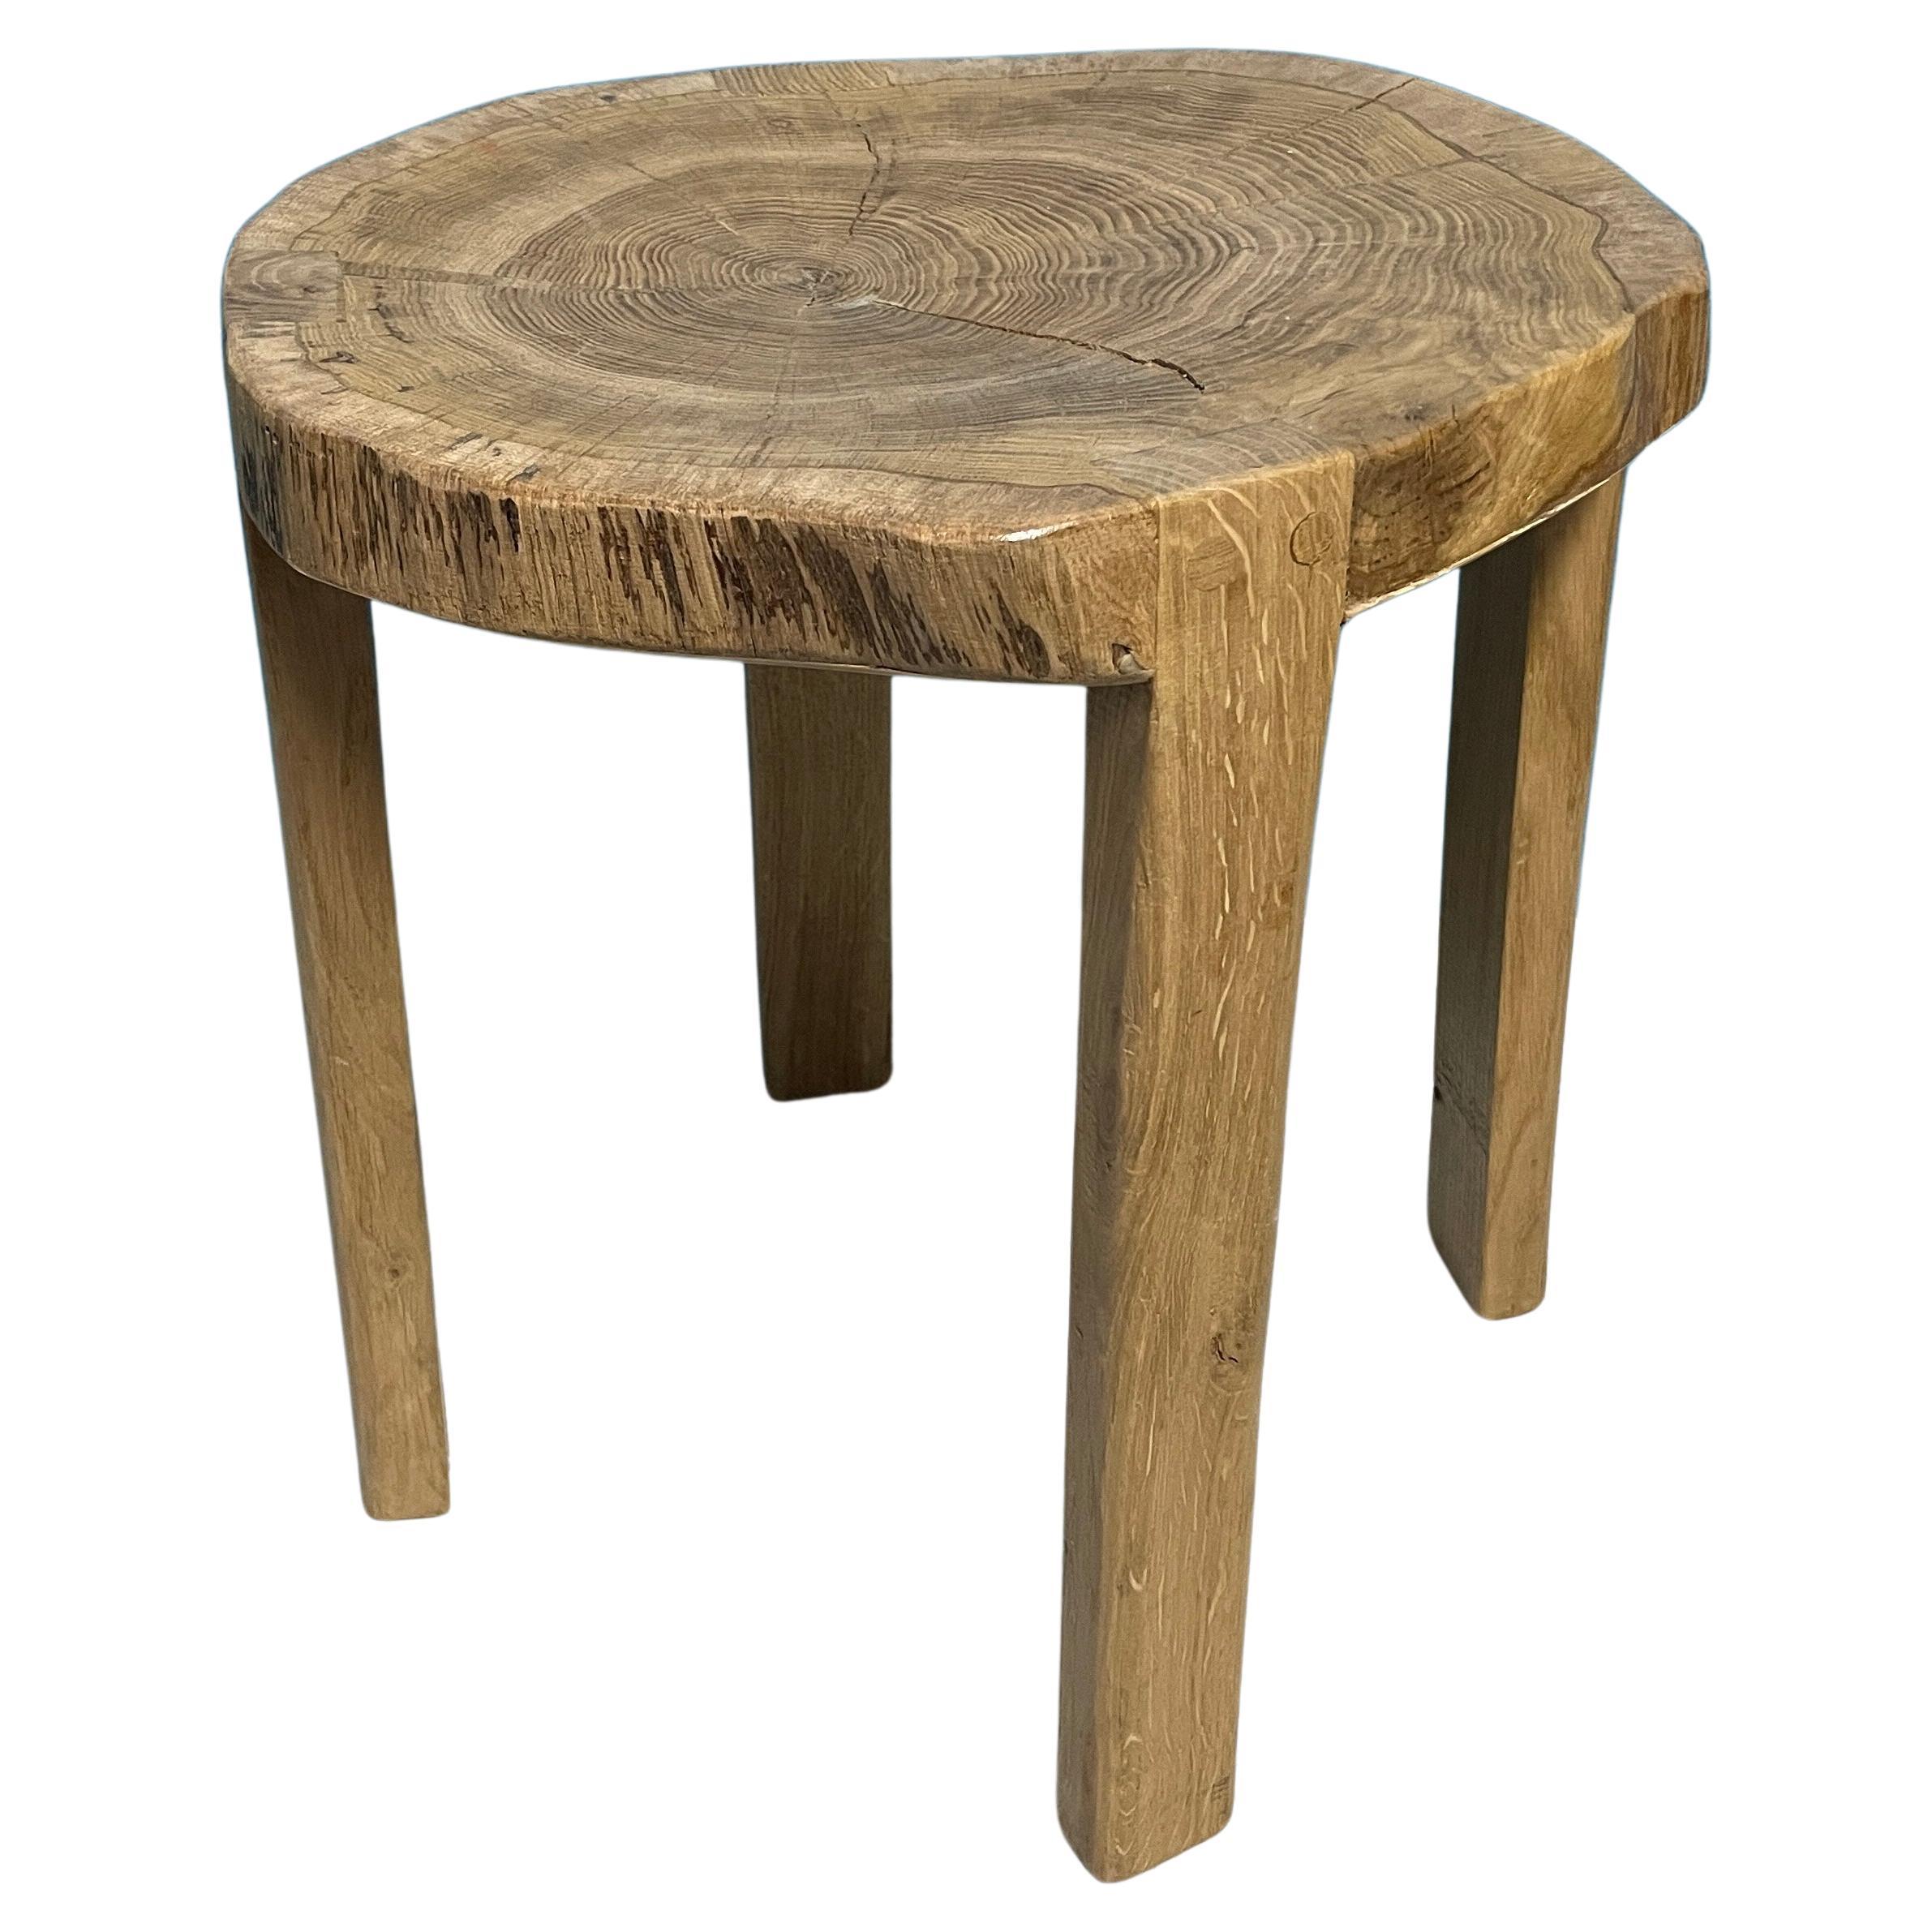 Rustic Vintage Oak Stool, Handcrafted in Finland For Sale